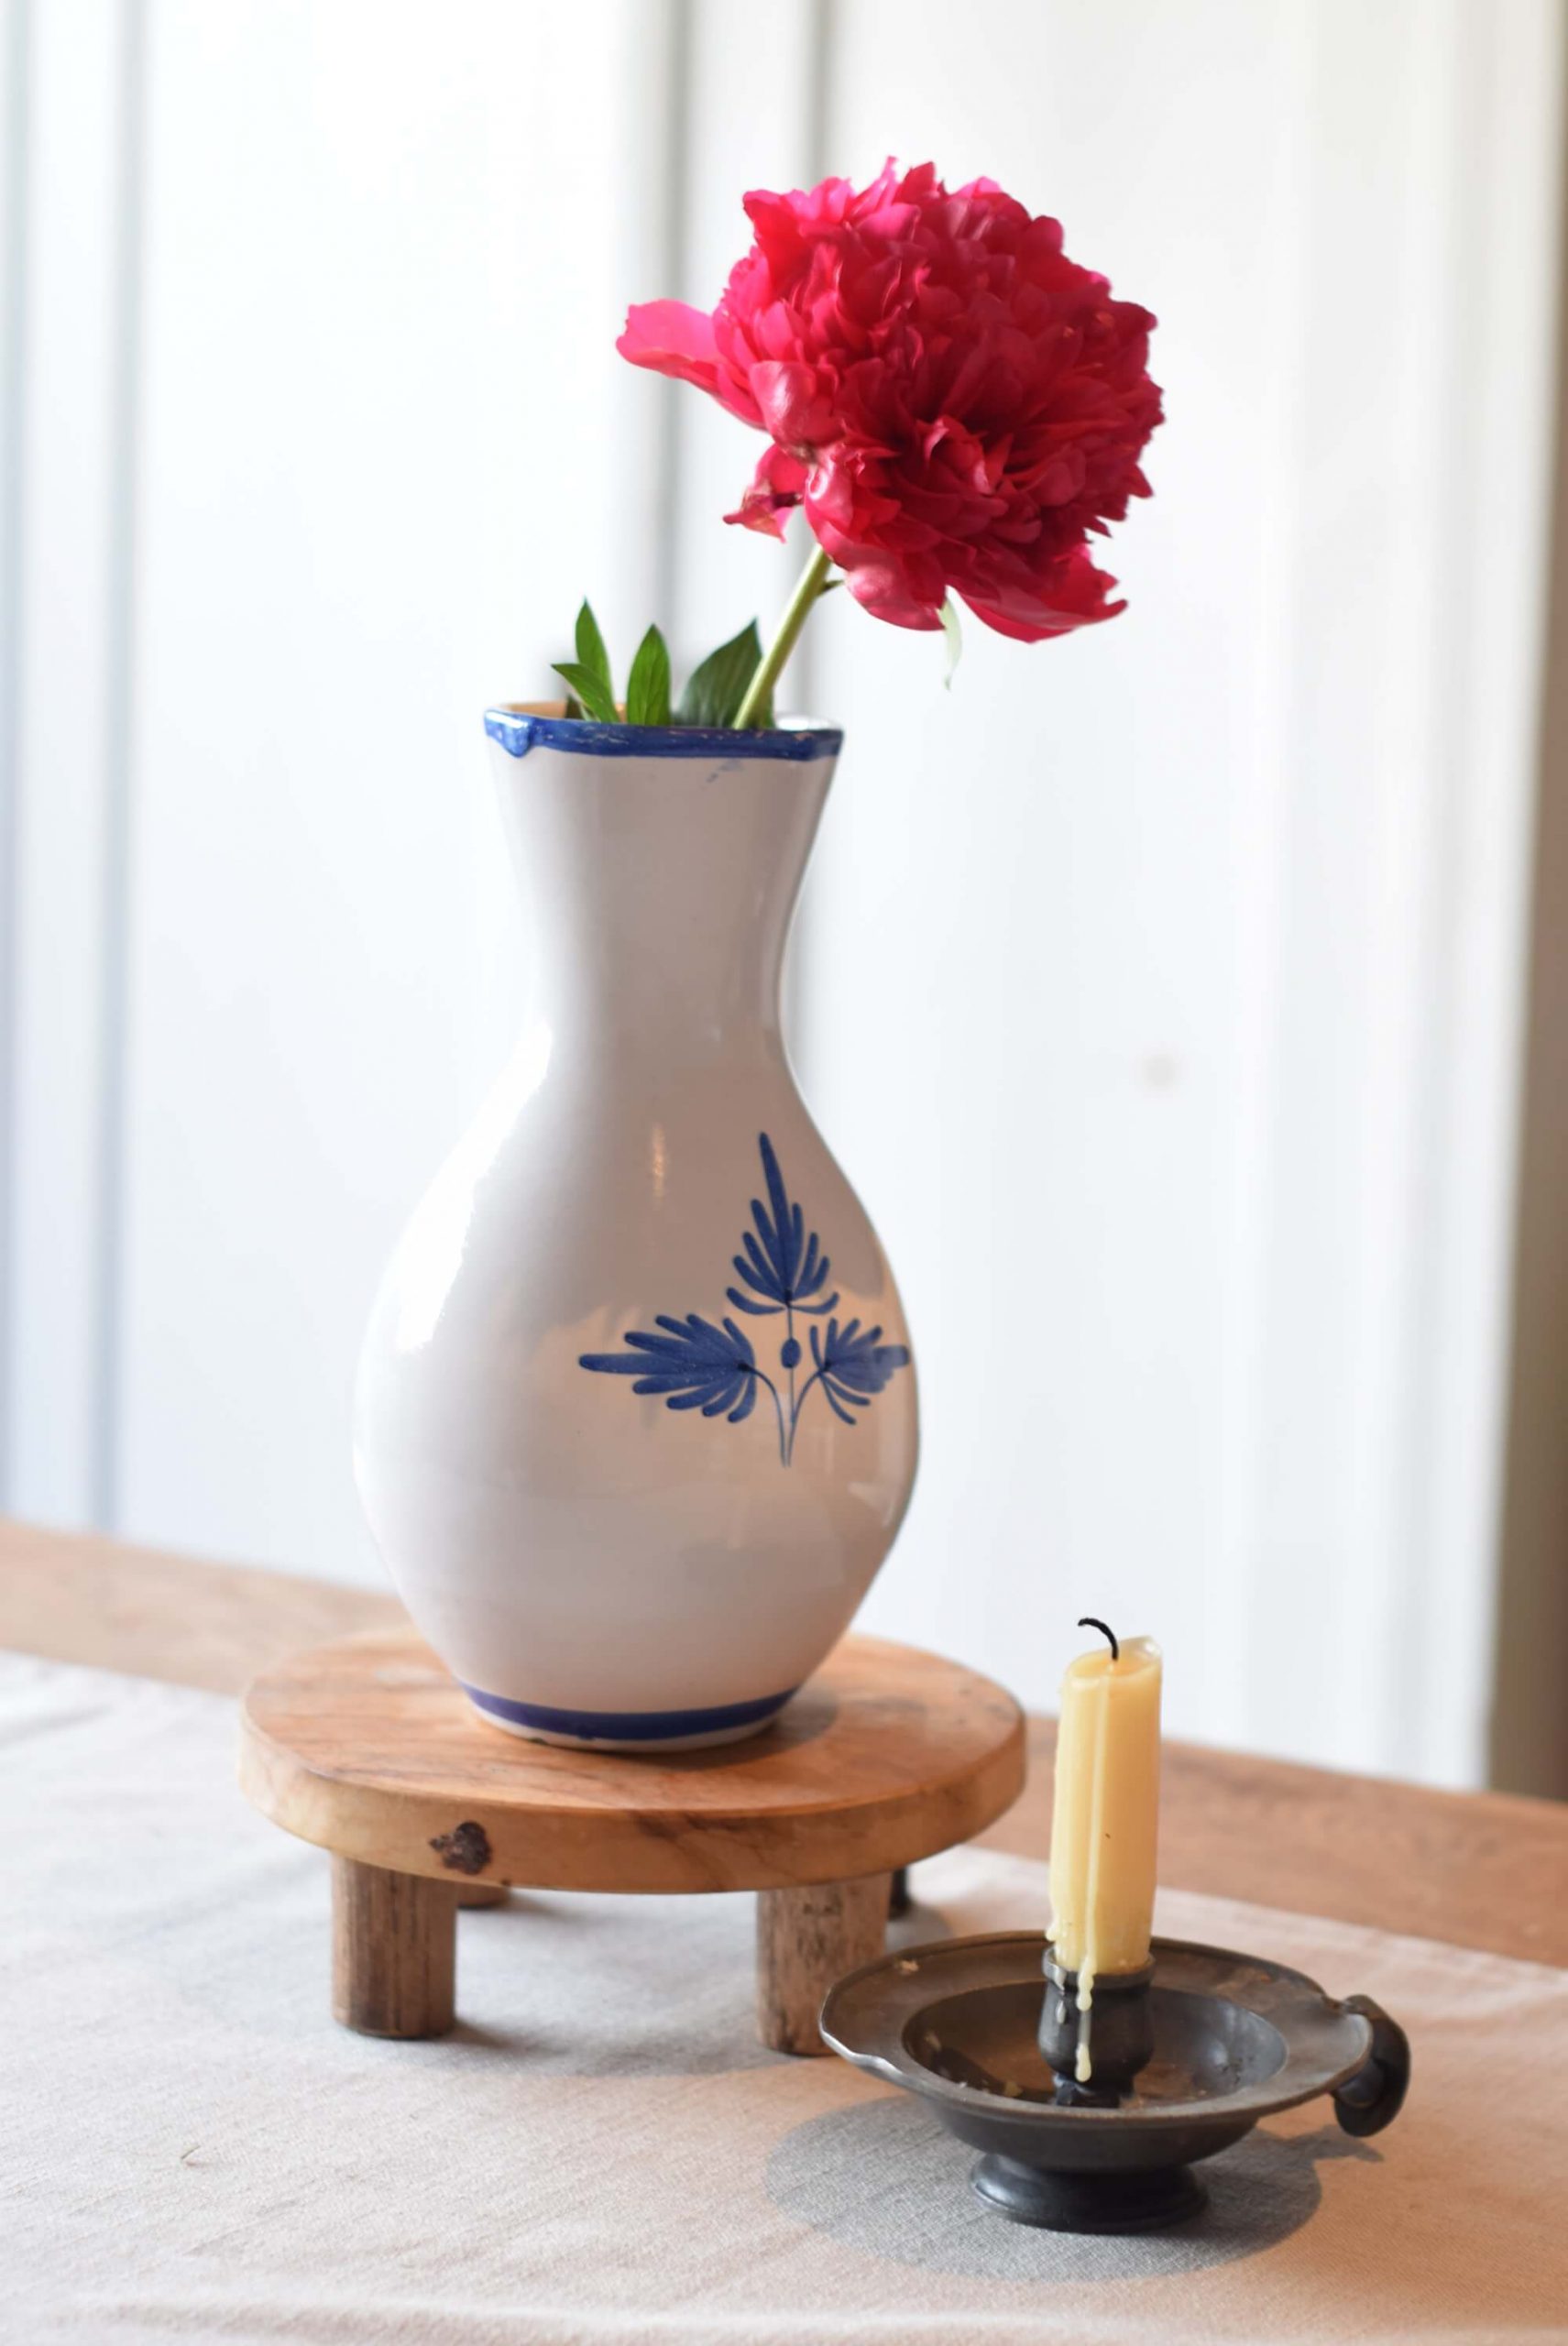 A gifted vase from the thriftstore in white with blue flowers painted on it and with a blue rim. It stands on a wooden plank and has a pink peony. Next to it stands a beeswax candle.